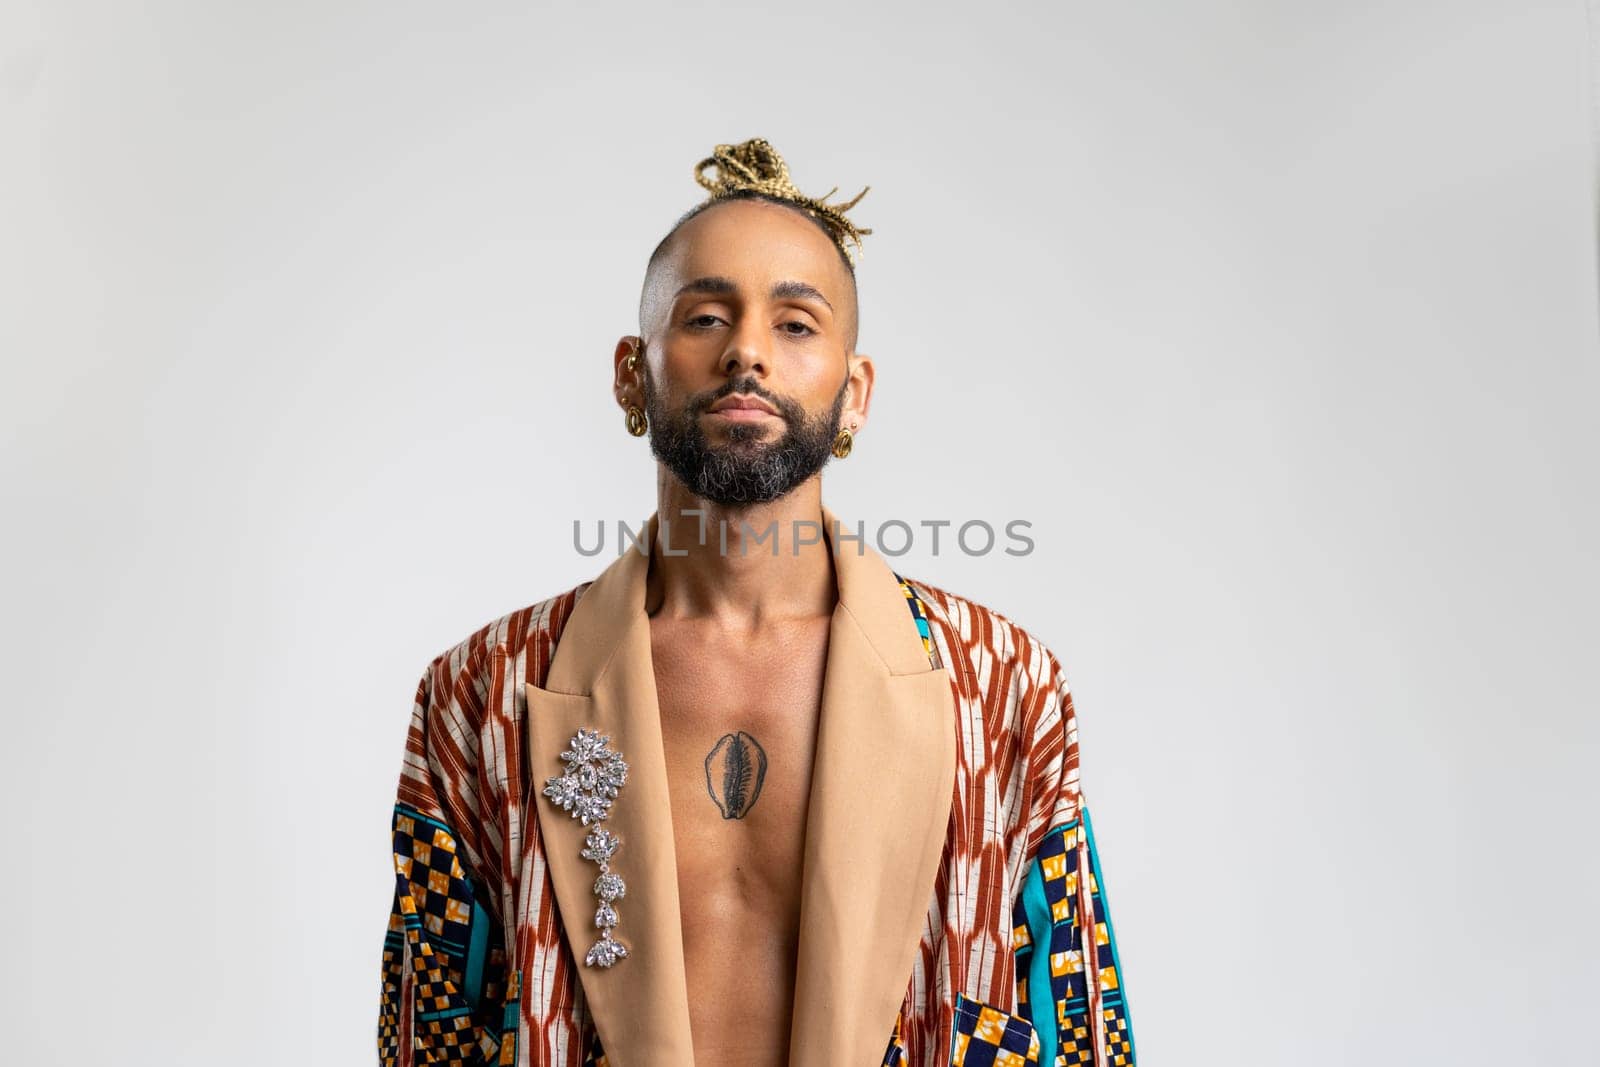 Gay man standing confidently isolated on white background, dressed vibrant, colorful jacket. Serious face looking camera, bold masculinity and self-assurance.